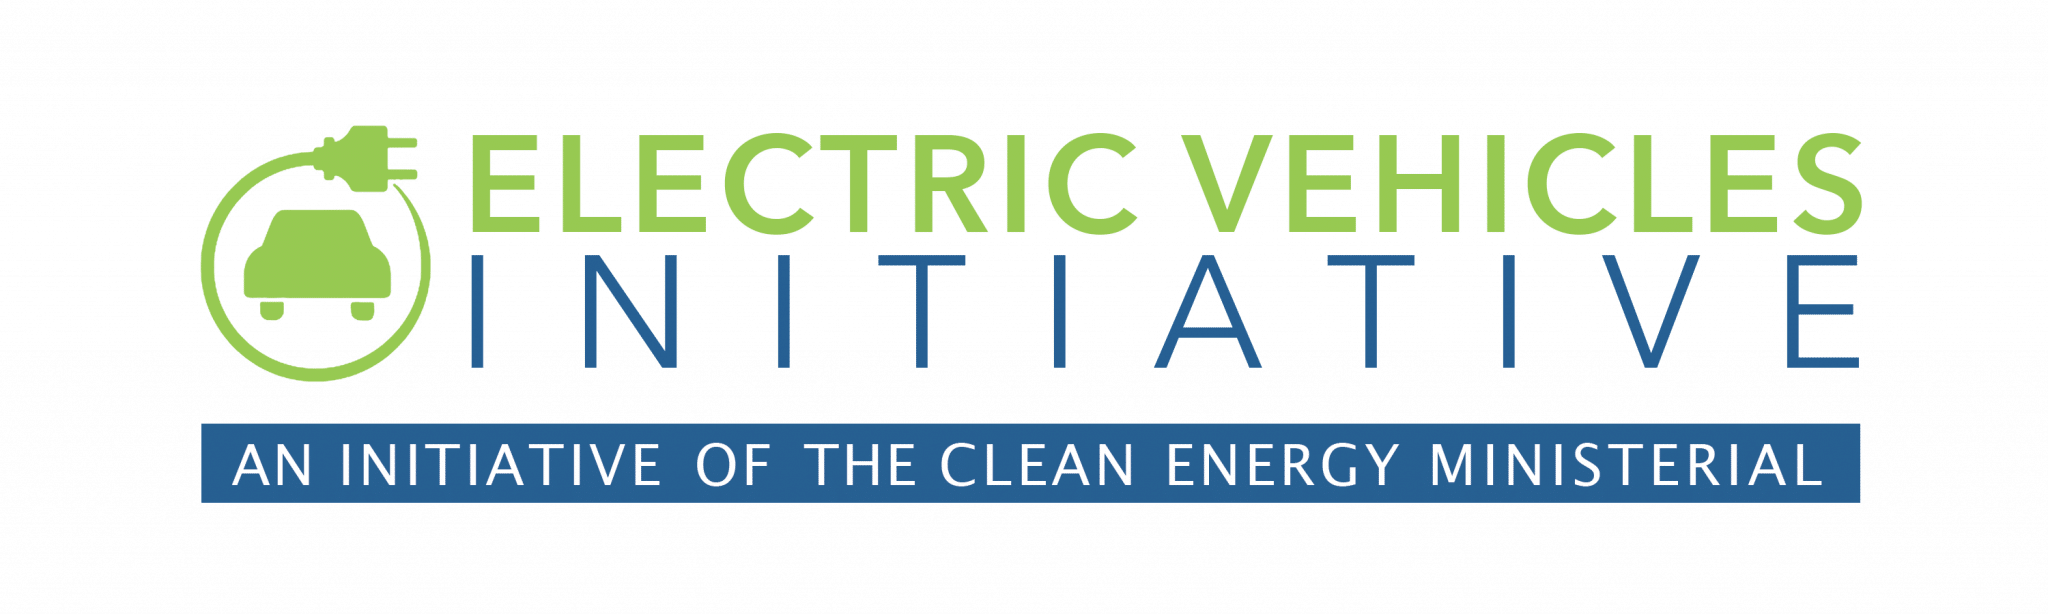 Electric Vehicles Initiative Clean Energy Ministerial